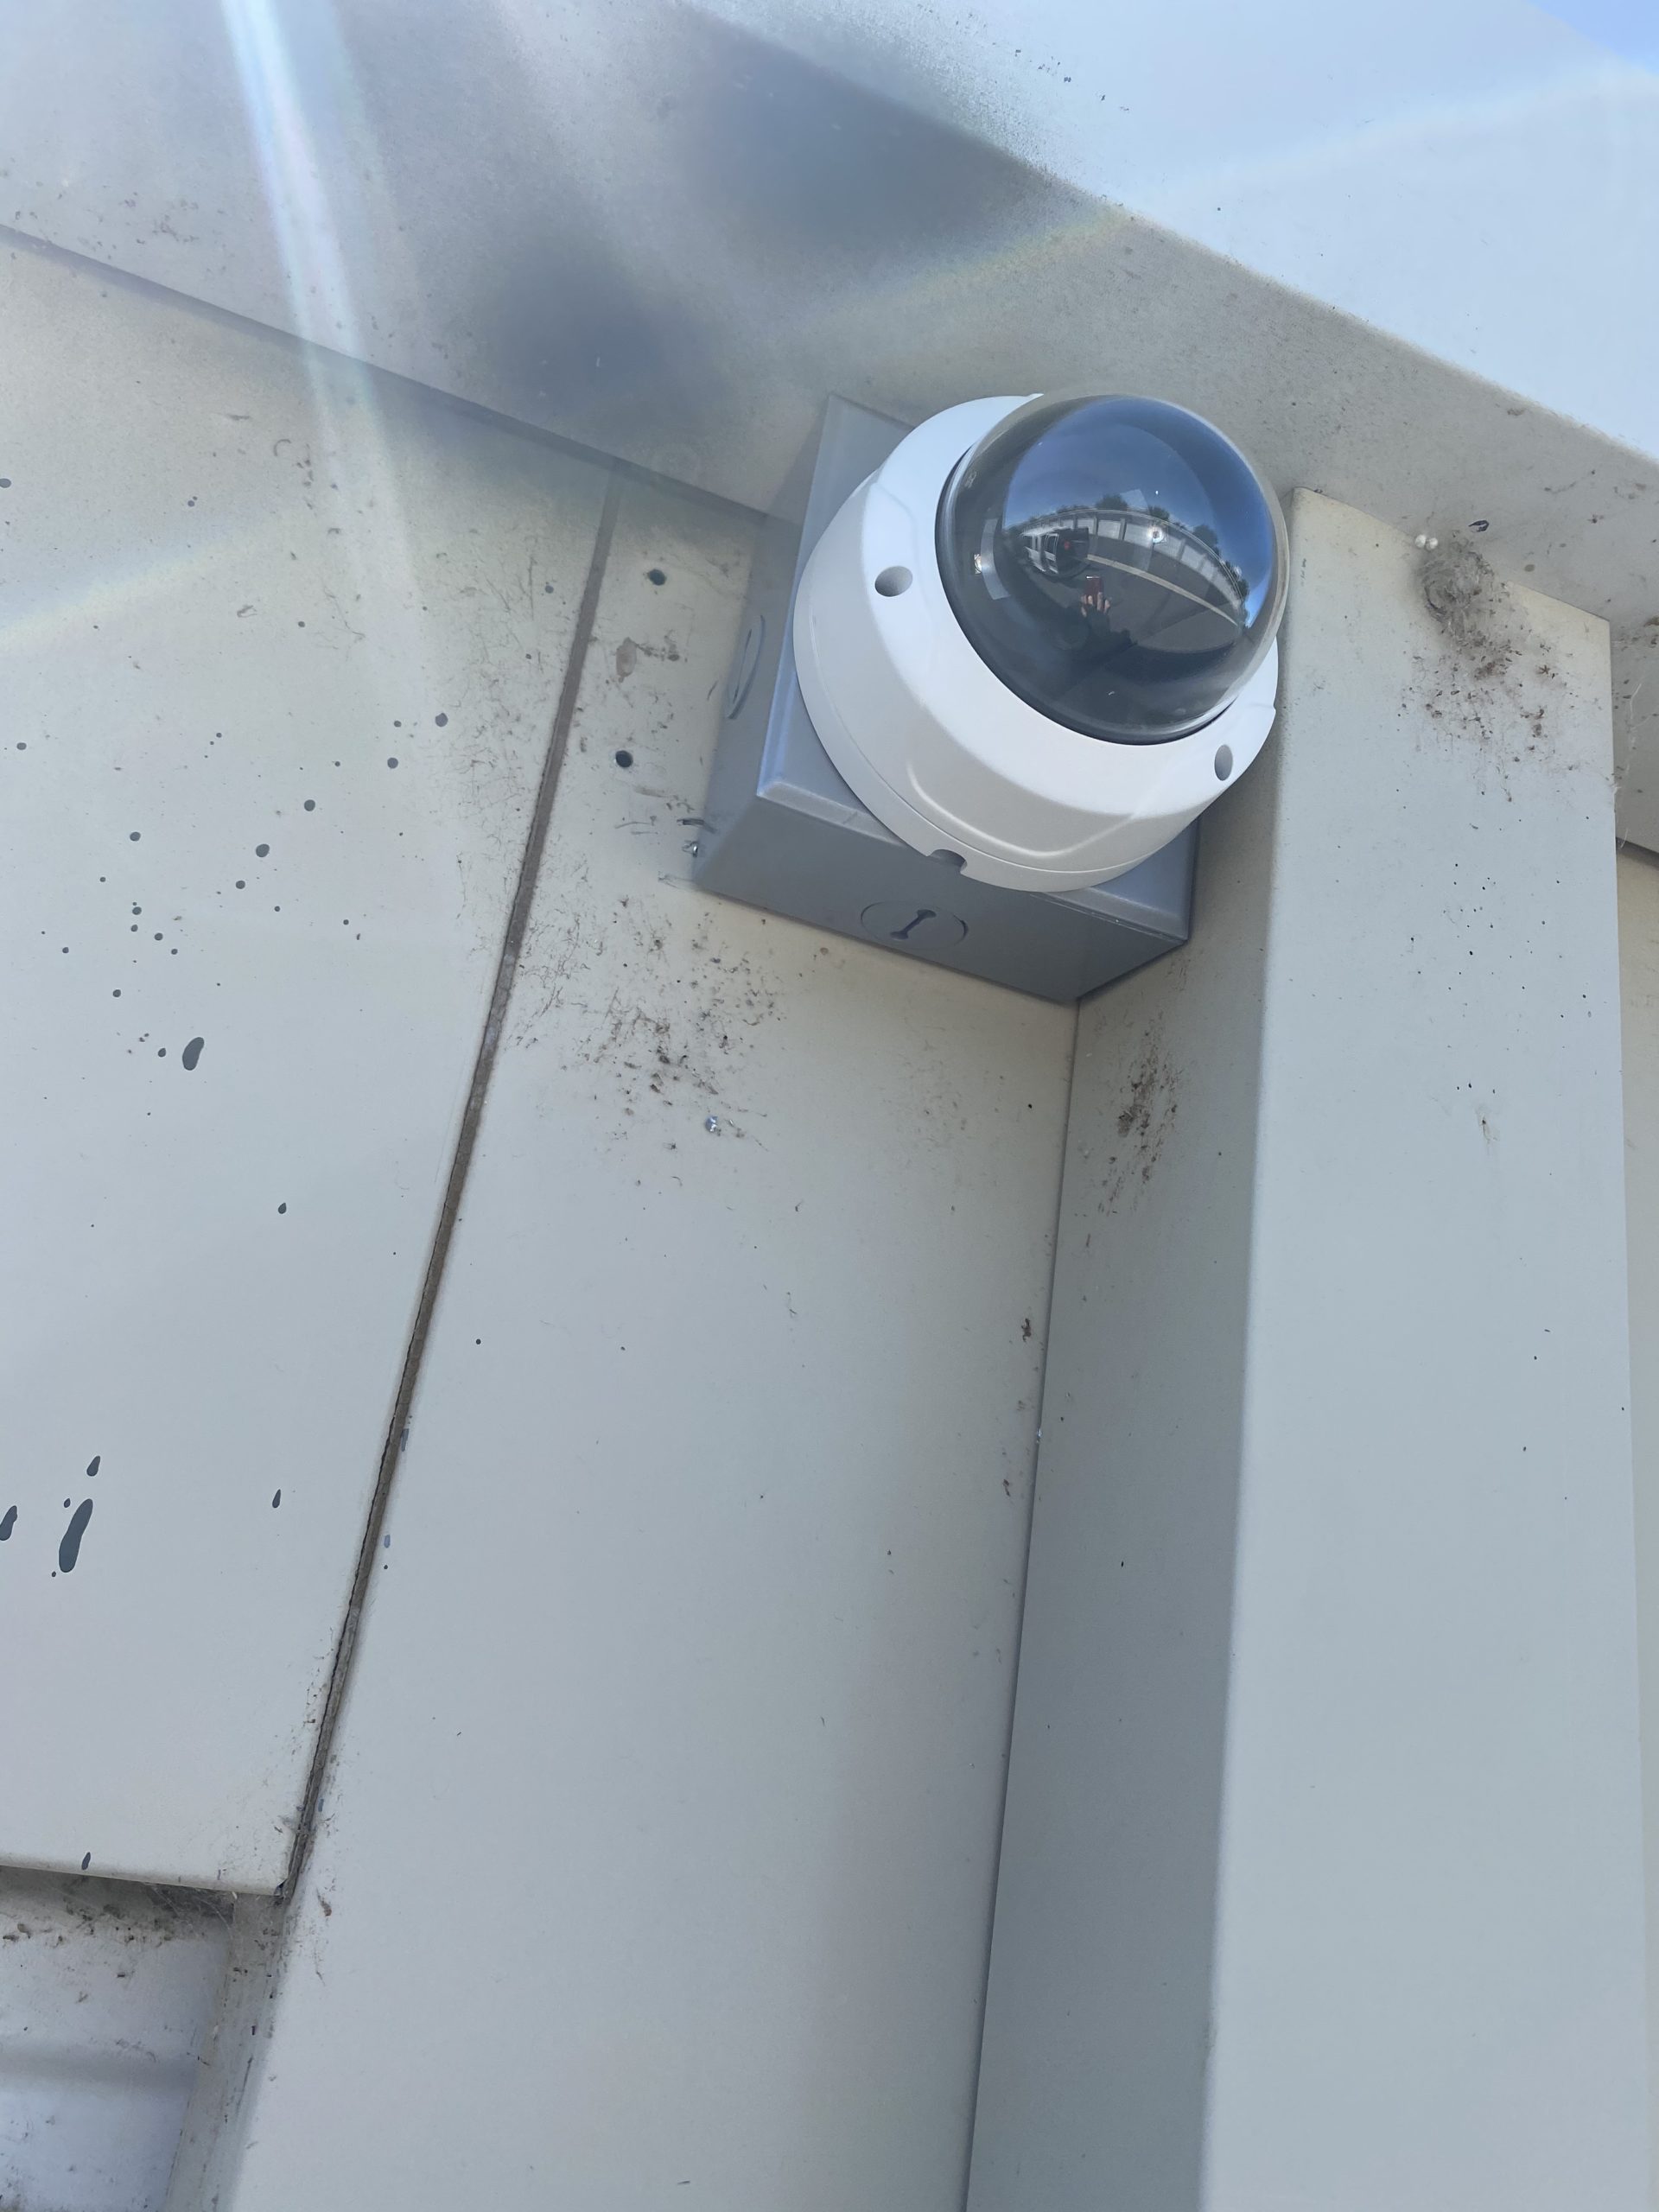 Dome security camera with no exposed wires